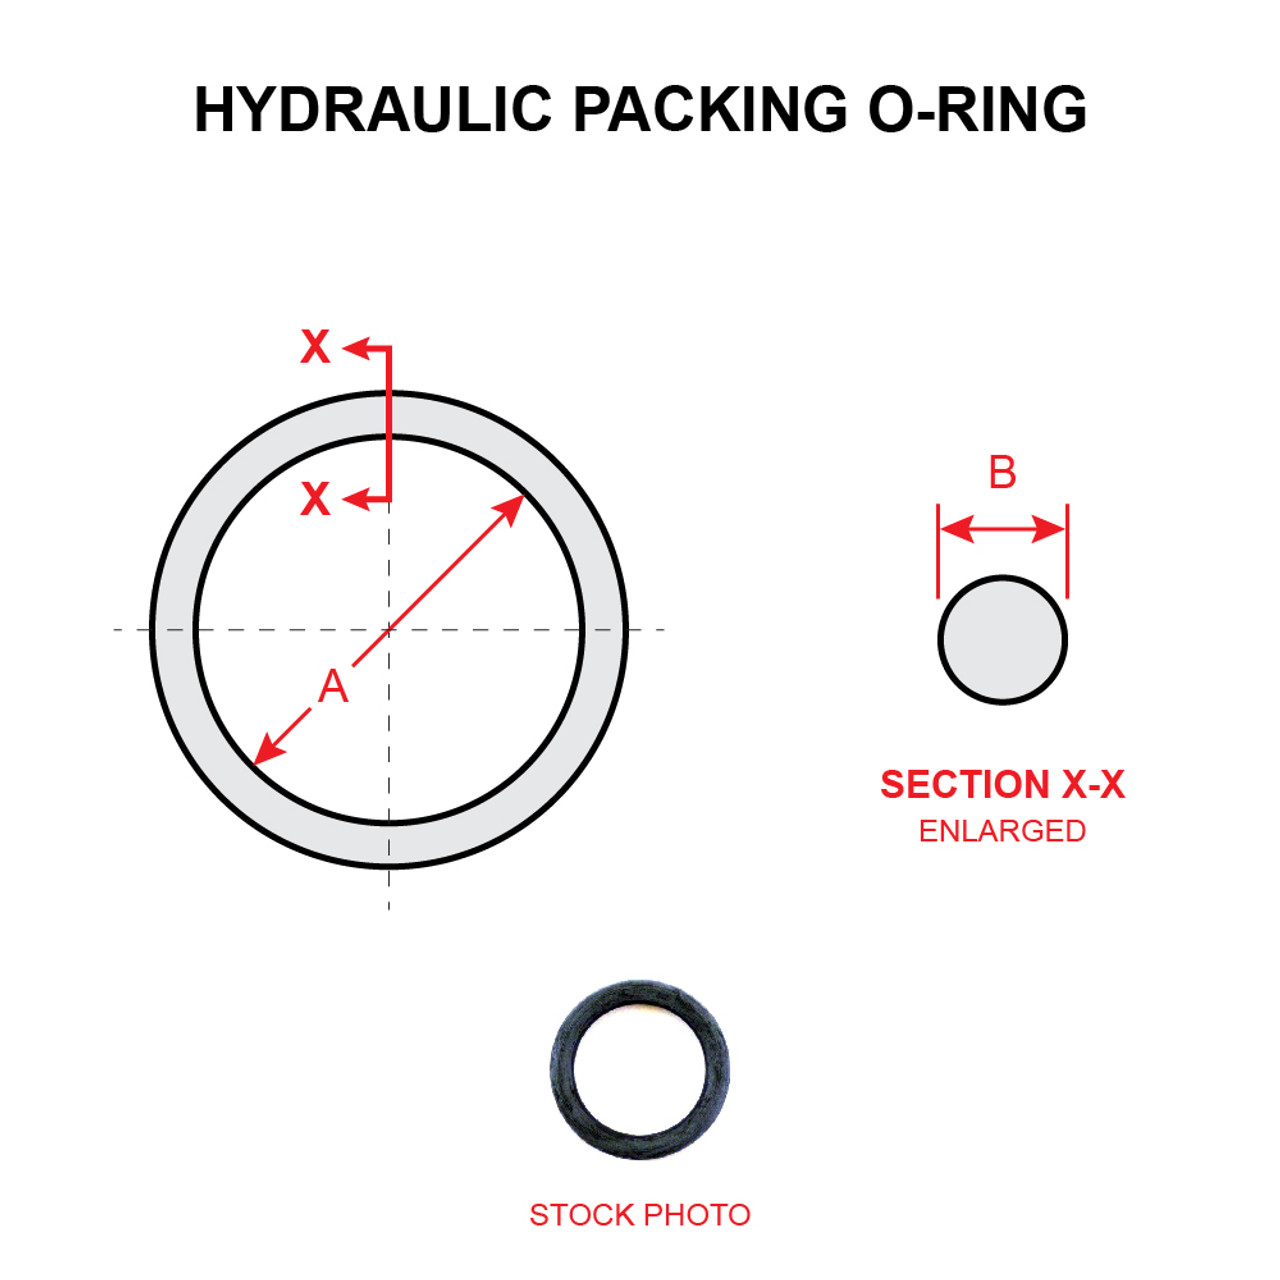 MS28775-237   HYDRAULIC PACKING O-RING